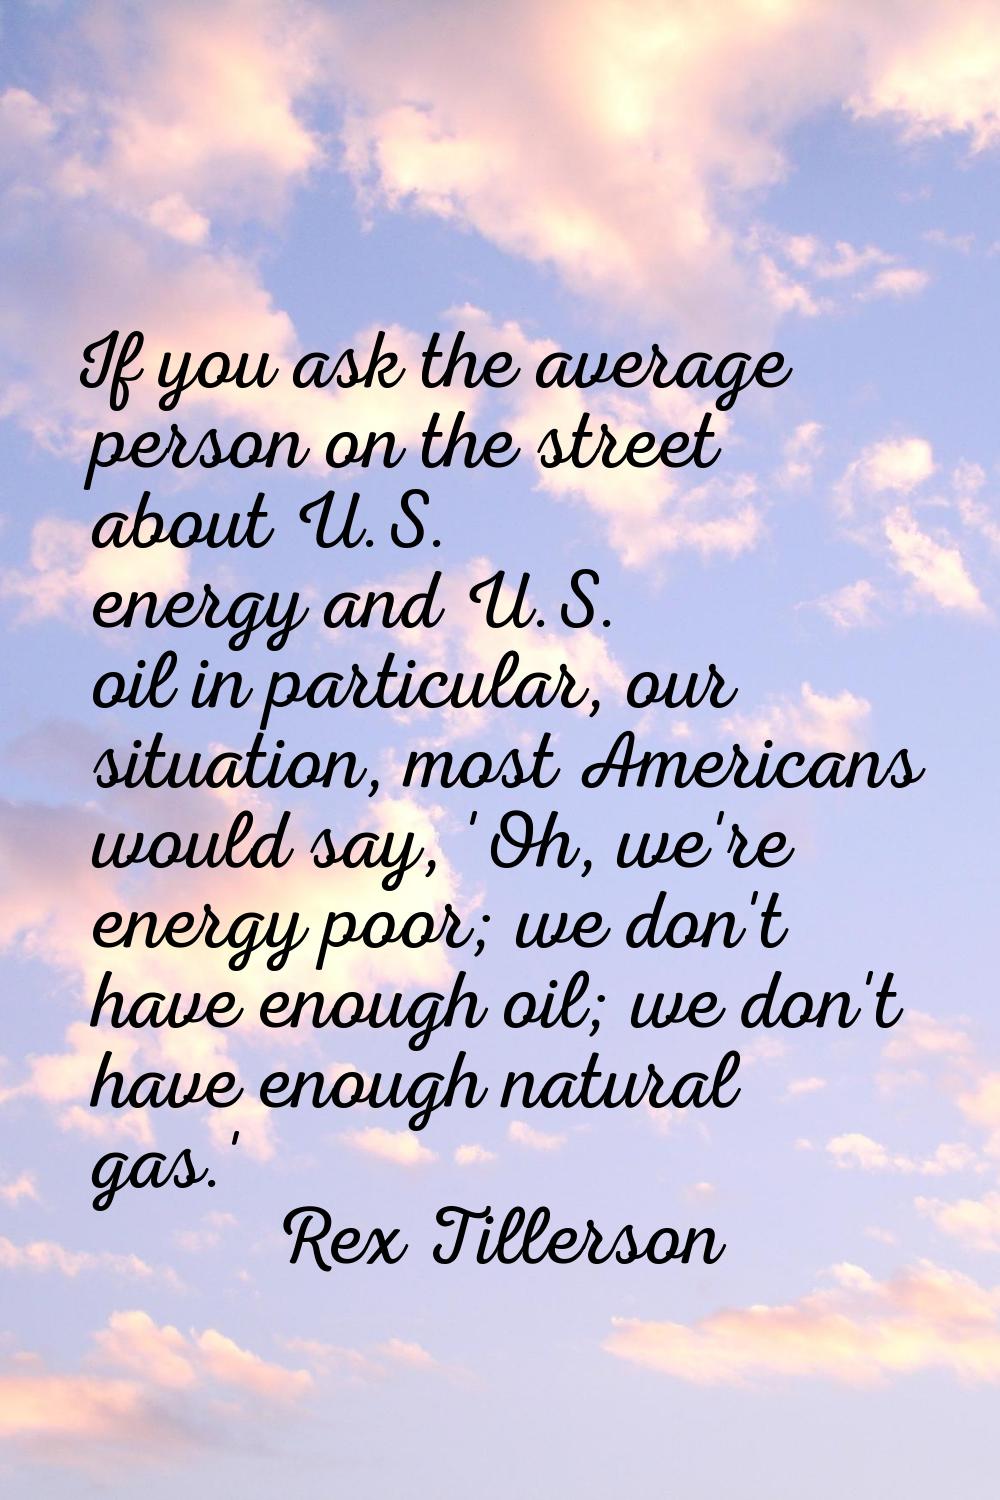 If you ask the average person on the street about U.S. energy and U.S. oil in particular, our situa